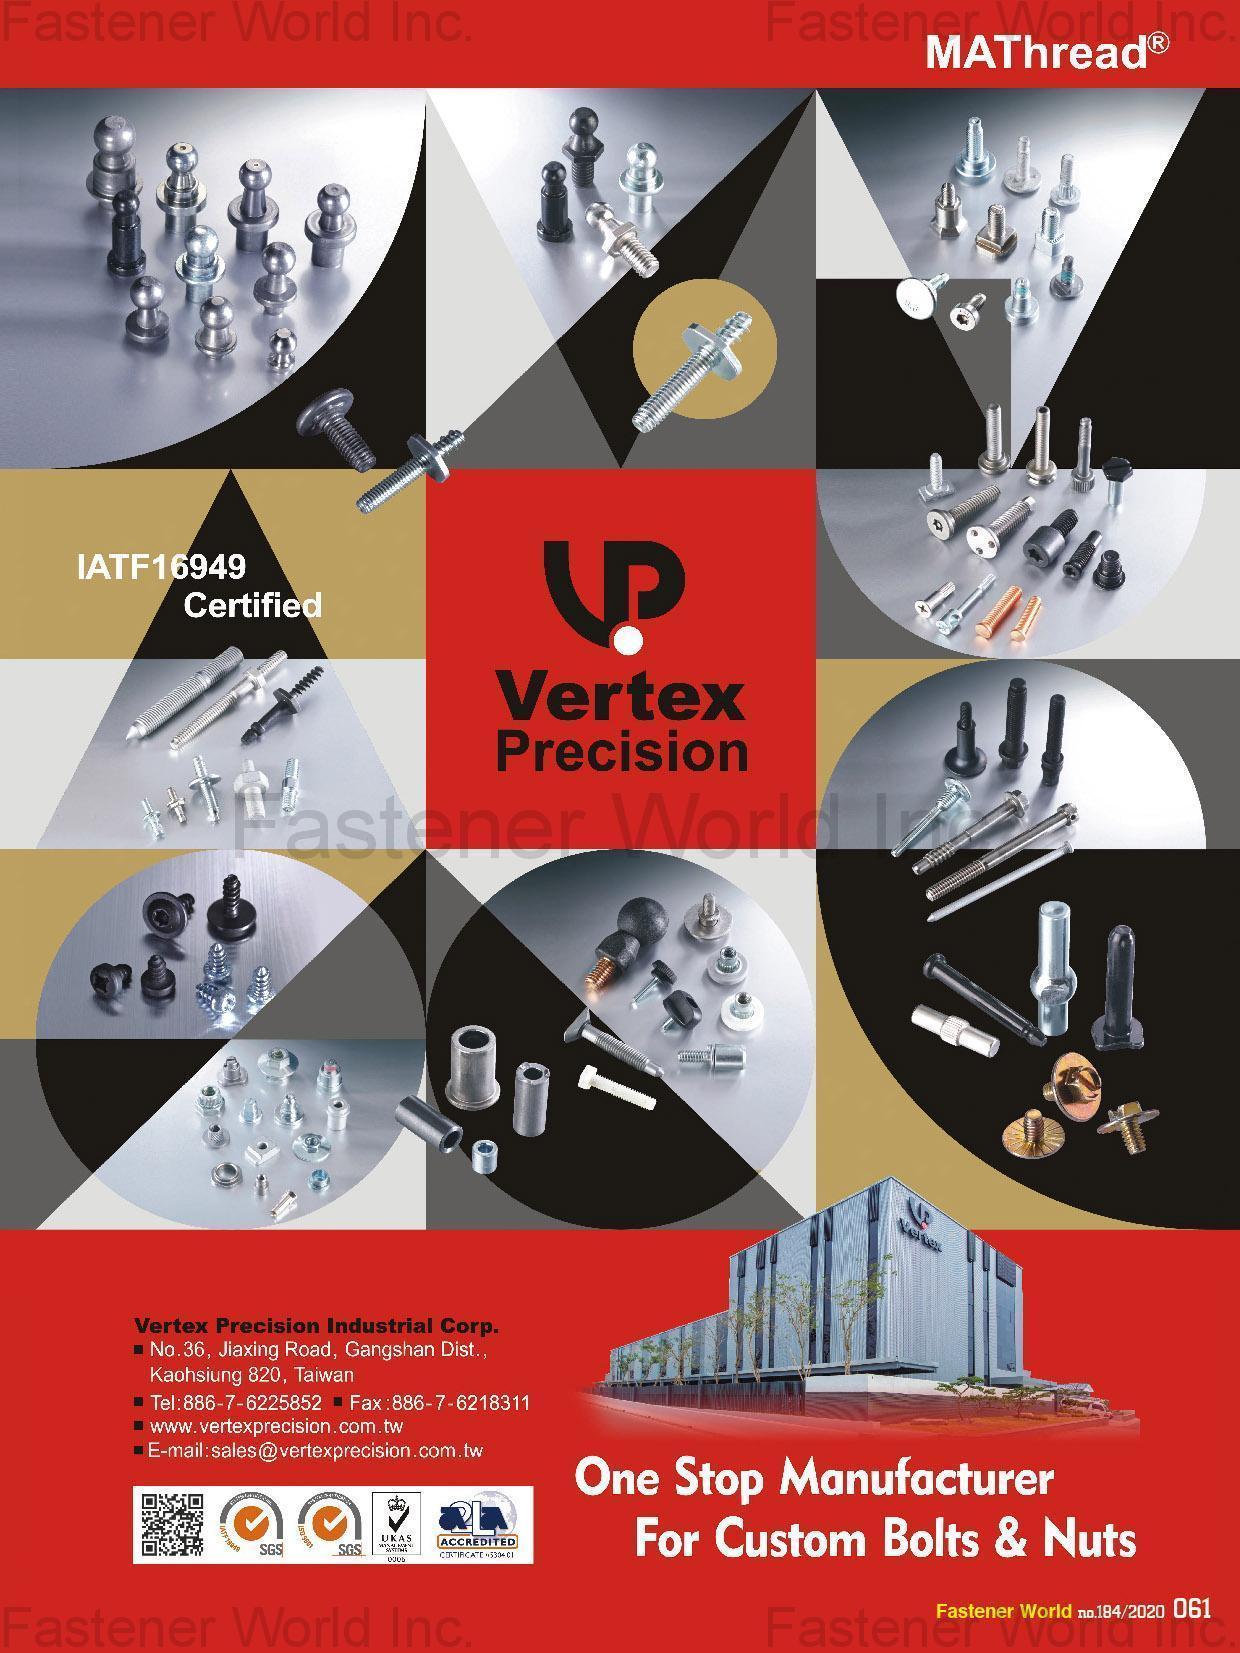 VERTEX PRECISION INDUSTRIAL CORP. , BALL STUD, MAThread-MATpoint, Double End Studs, Custom Screws & Bolts, Custom Nuts, Special Pins, Bushings, Assembly Components, TriLobular and Plastic Screws